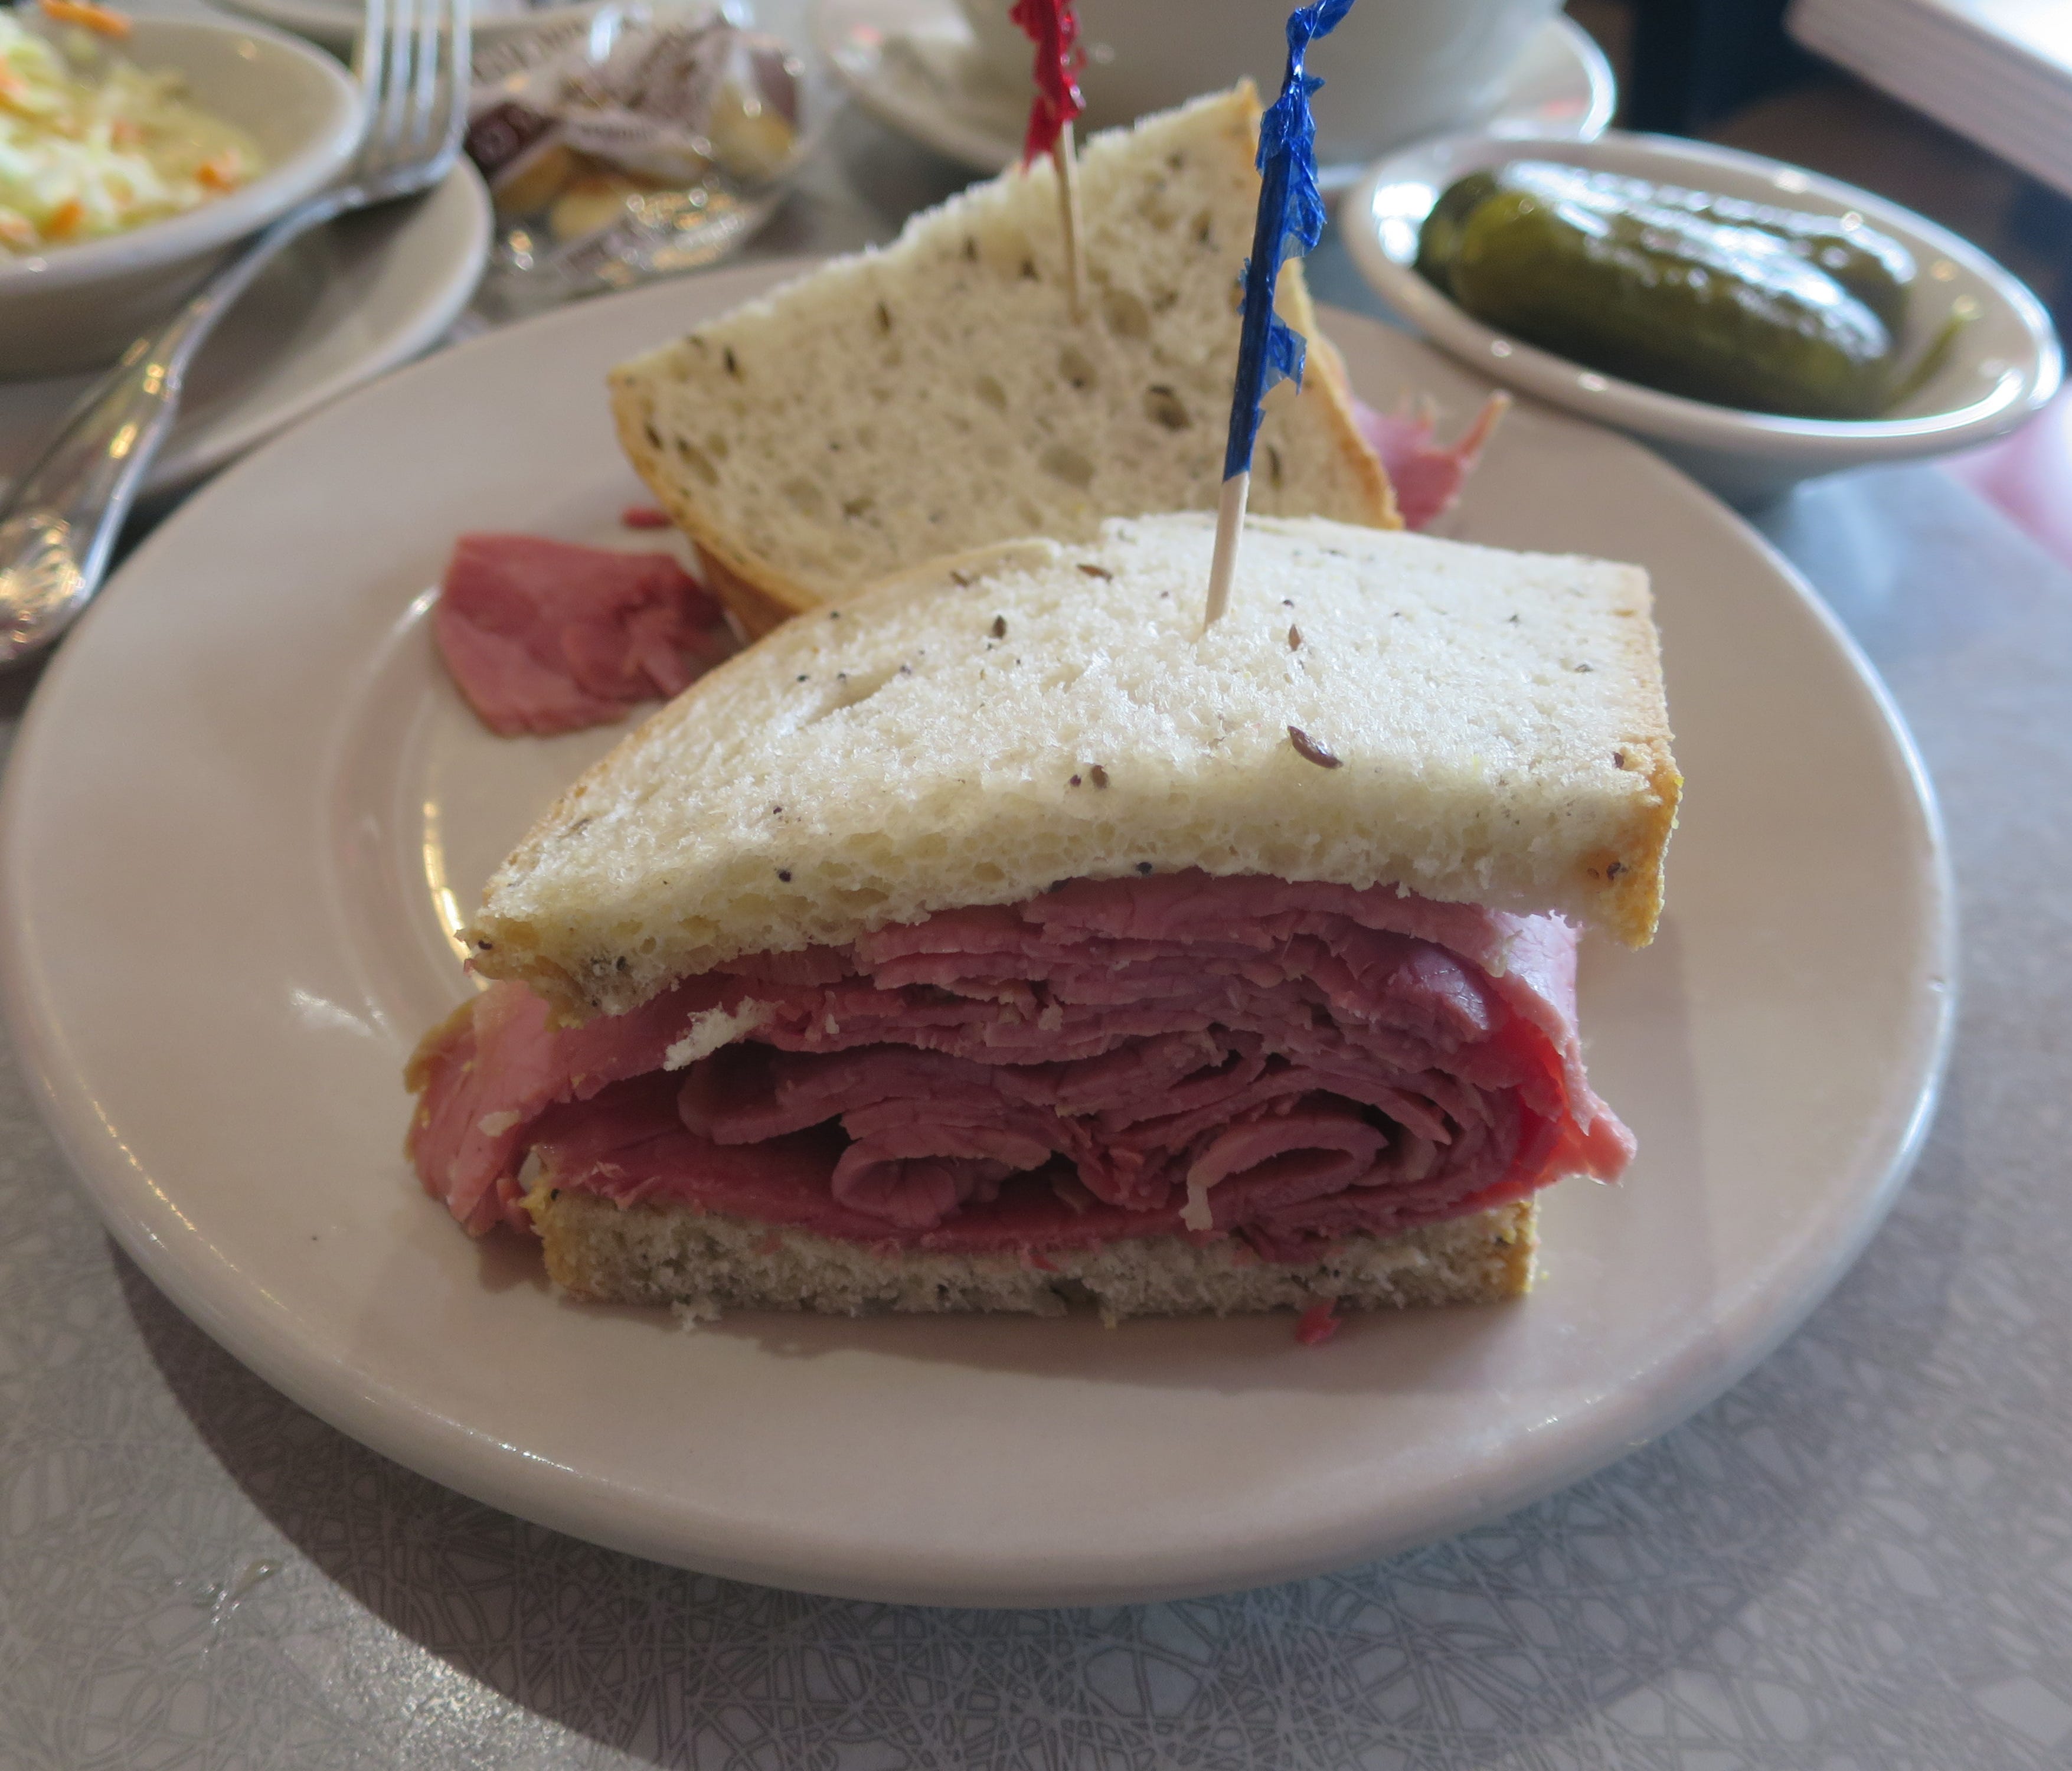 Katz's offers all of its deli sandwiches with half or full meat, and unusually serves both standard and First Cut corned beef. This is a half meat but still generous version of the First Cut.